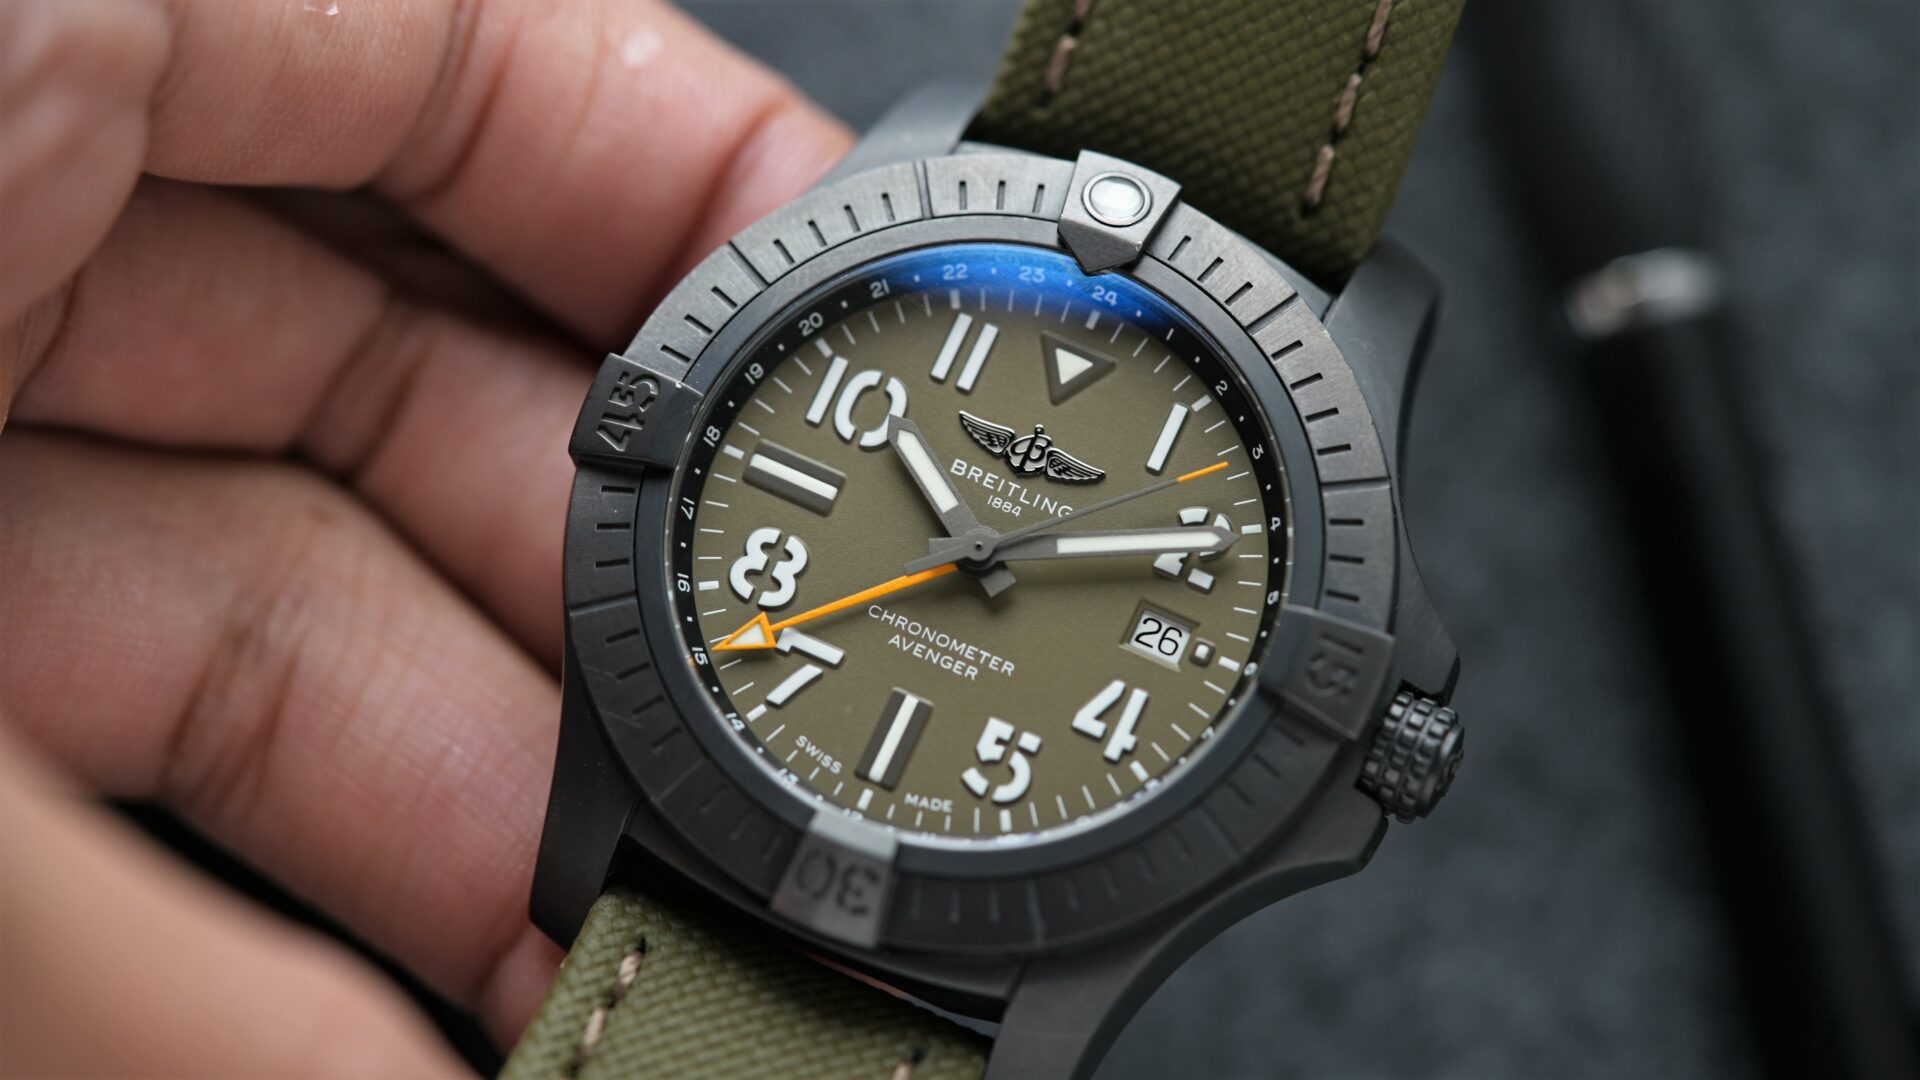 Breitling Avenger Automatic Gmt 45 Night Mission Limited V323952A1L1X1 wristwatch being held in hand.